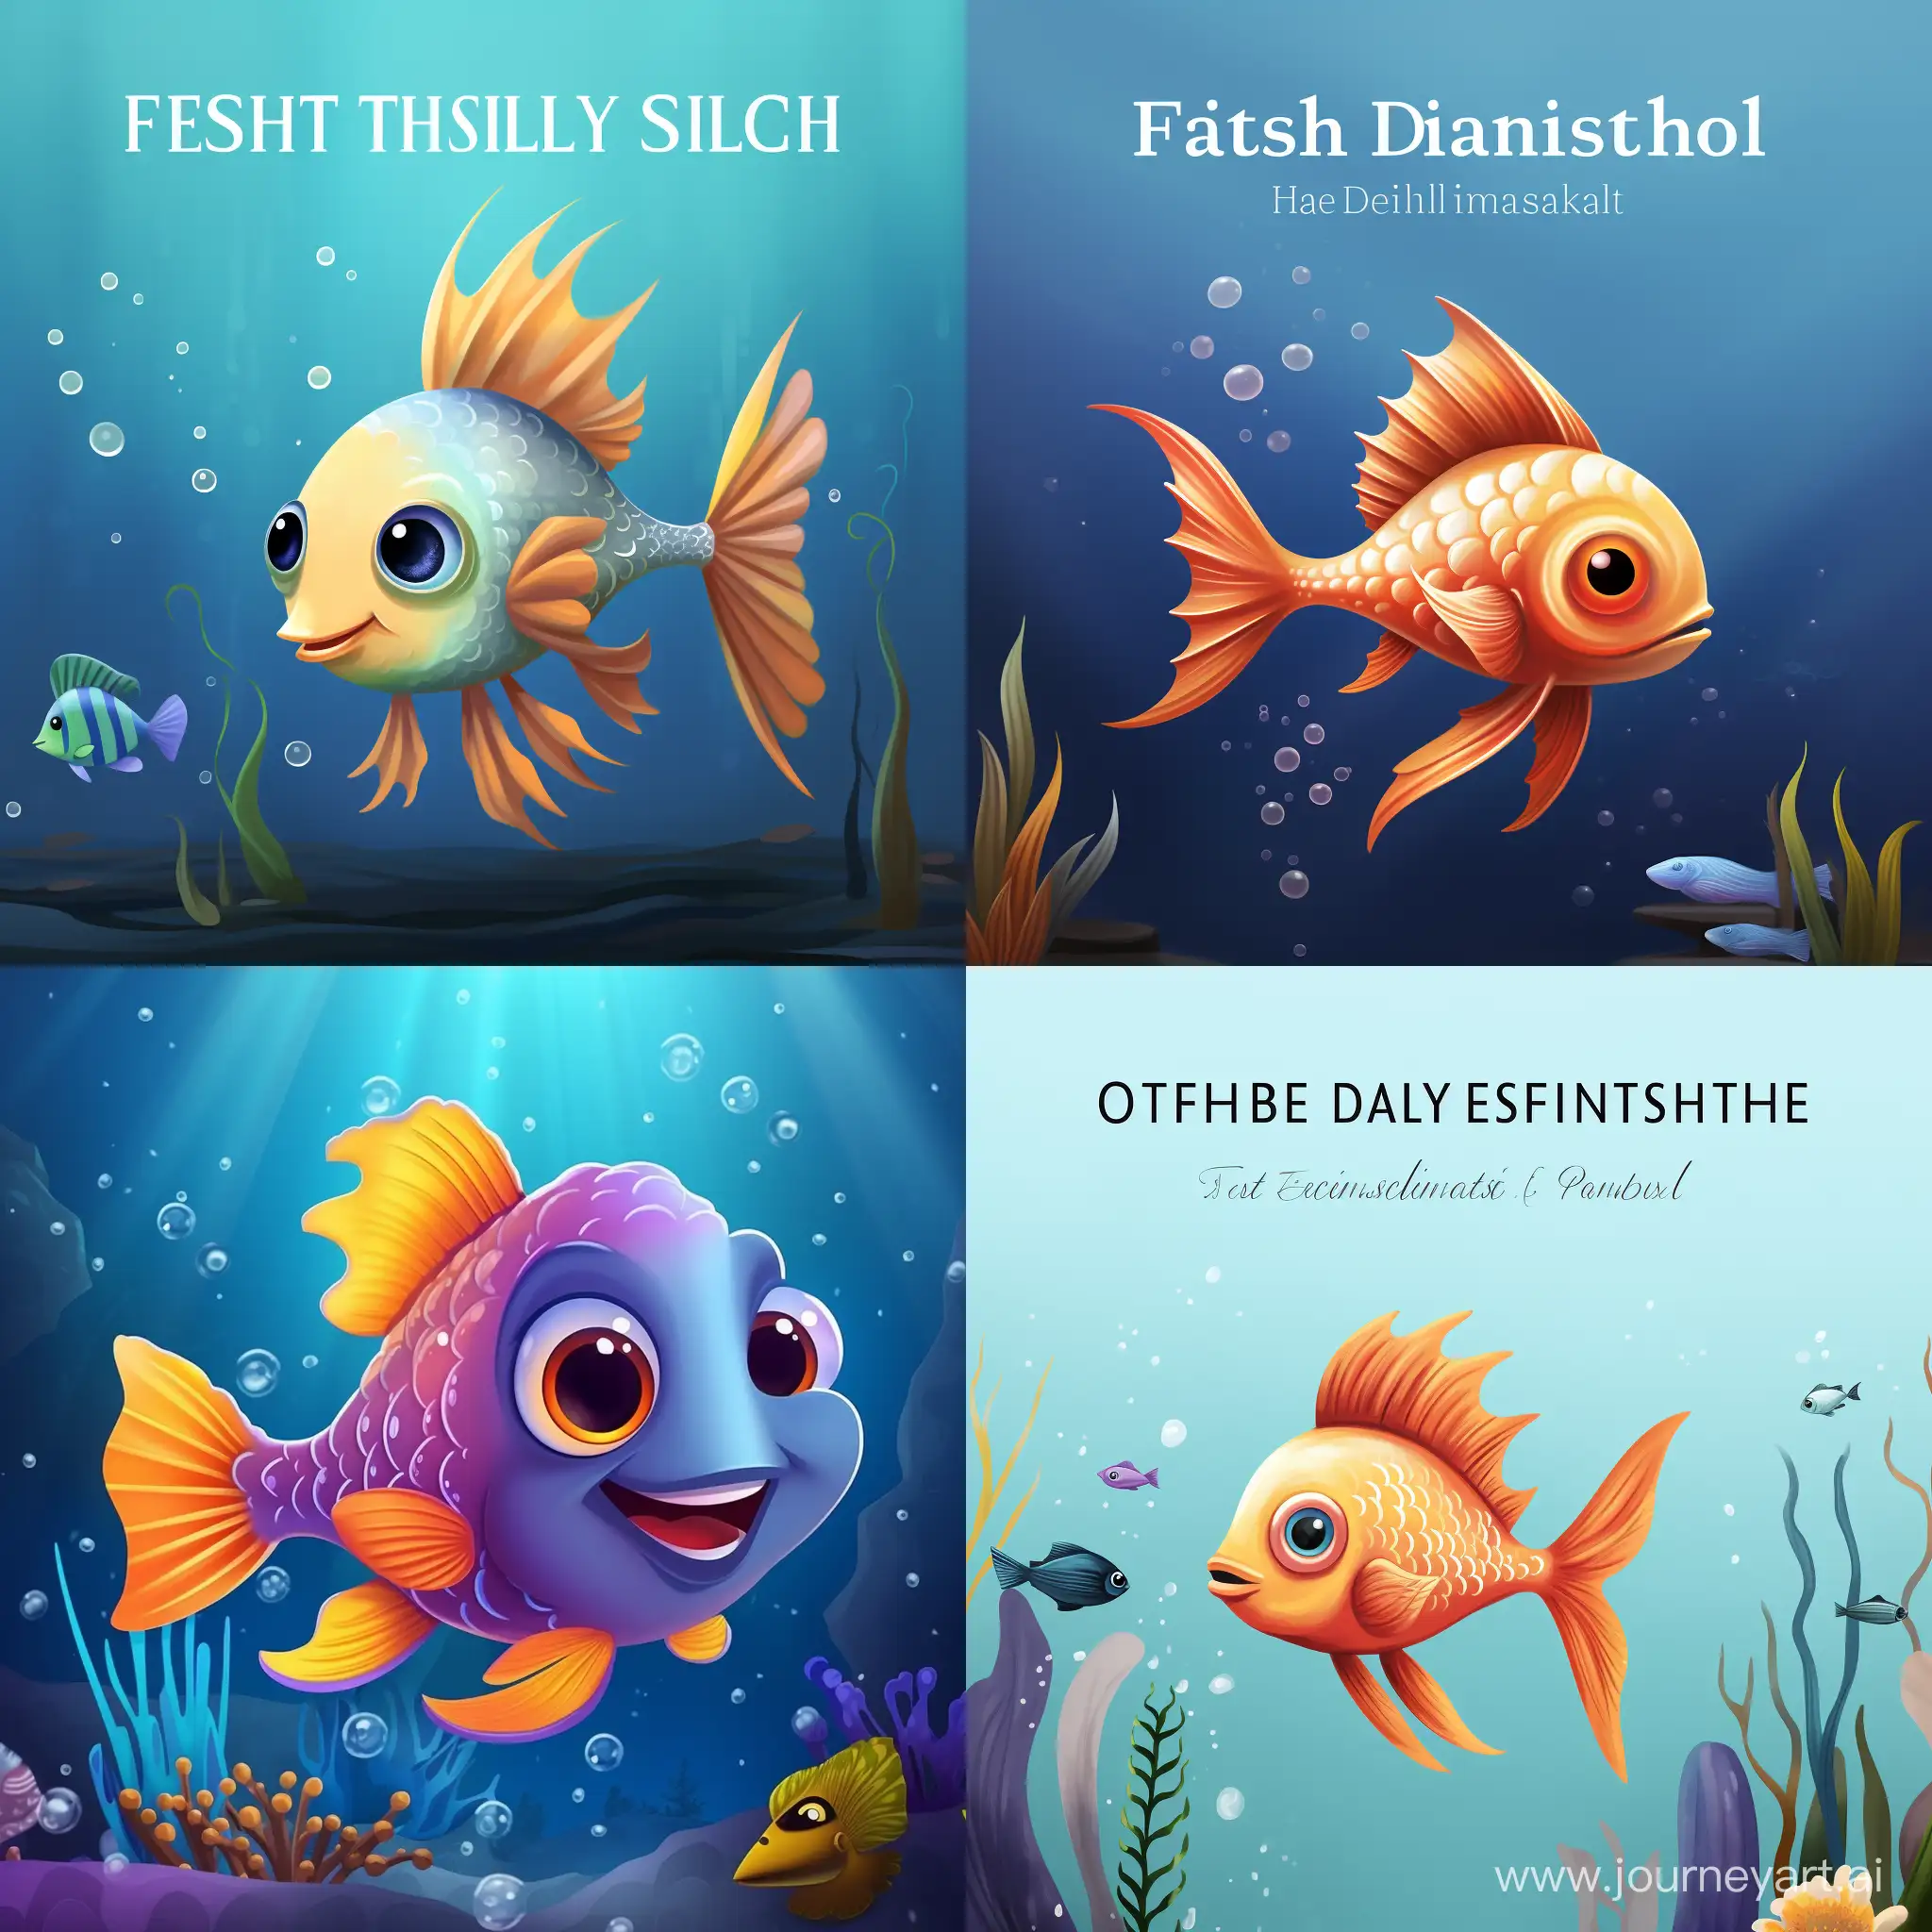   Painting a cute fish for child book single dimension


